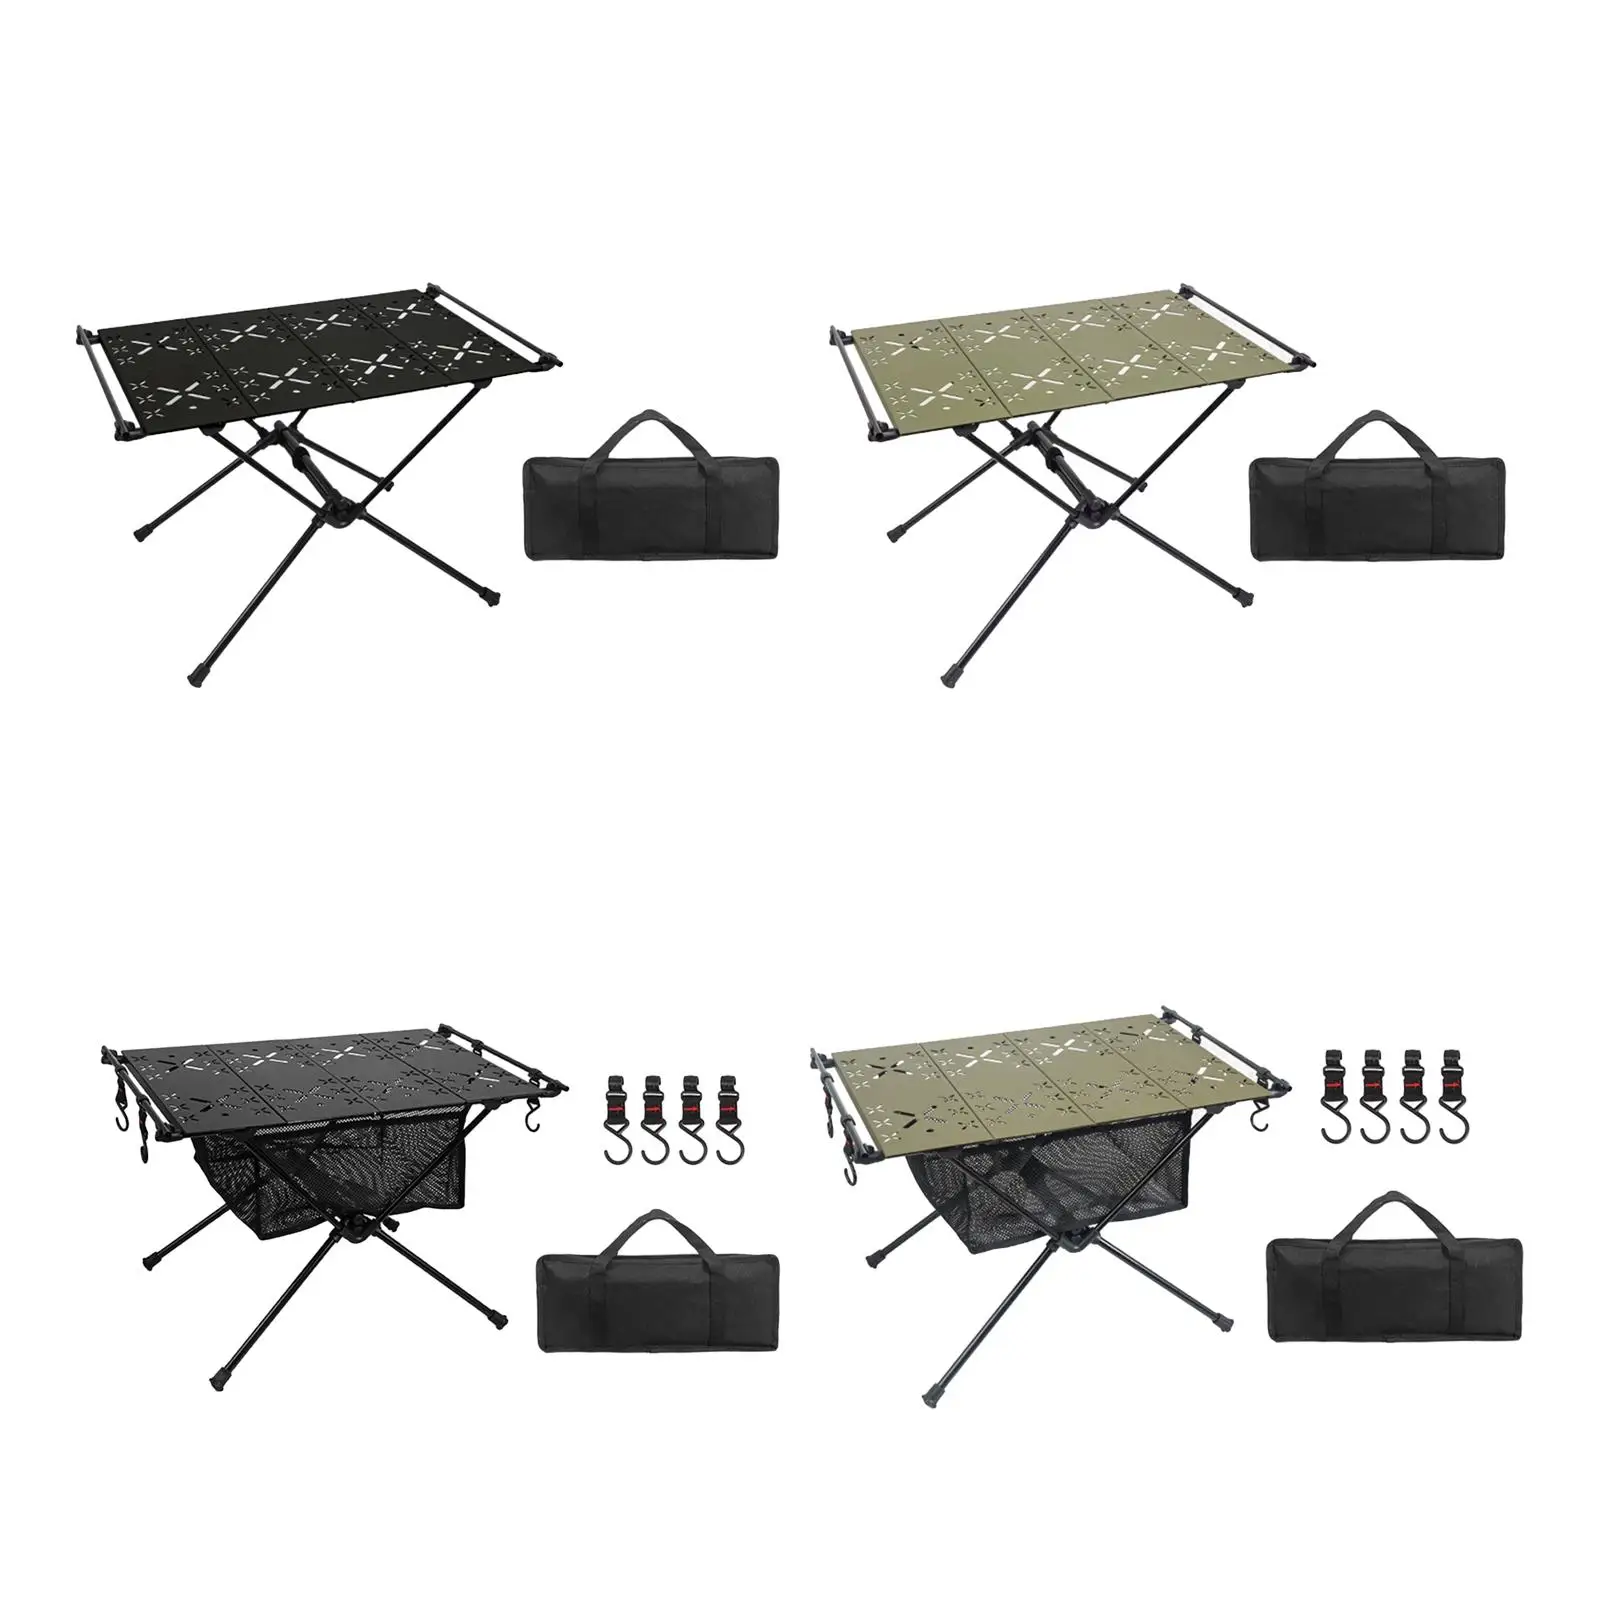 Foldable Camping Table with Storage Bag Outdoor Foldable Table Beach Table Camping Desk for Hiking Backyard Garden